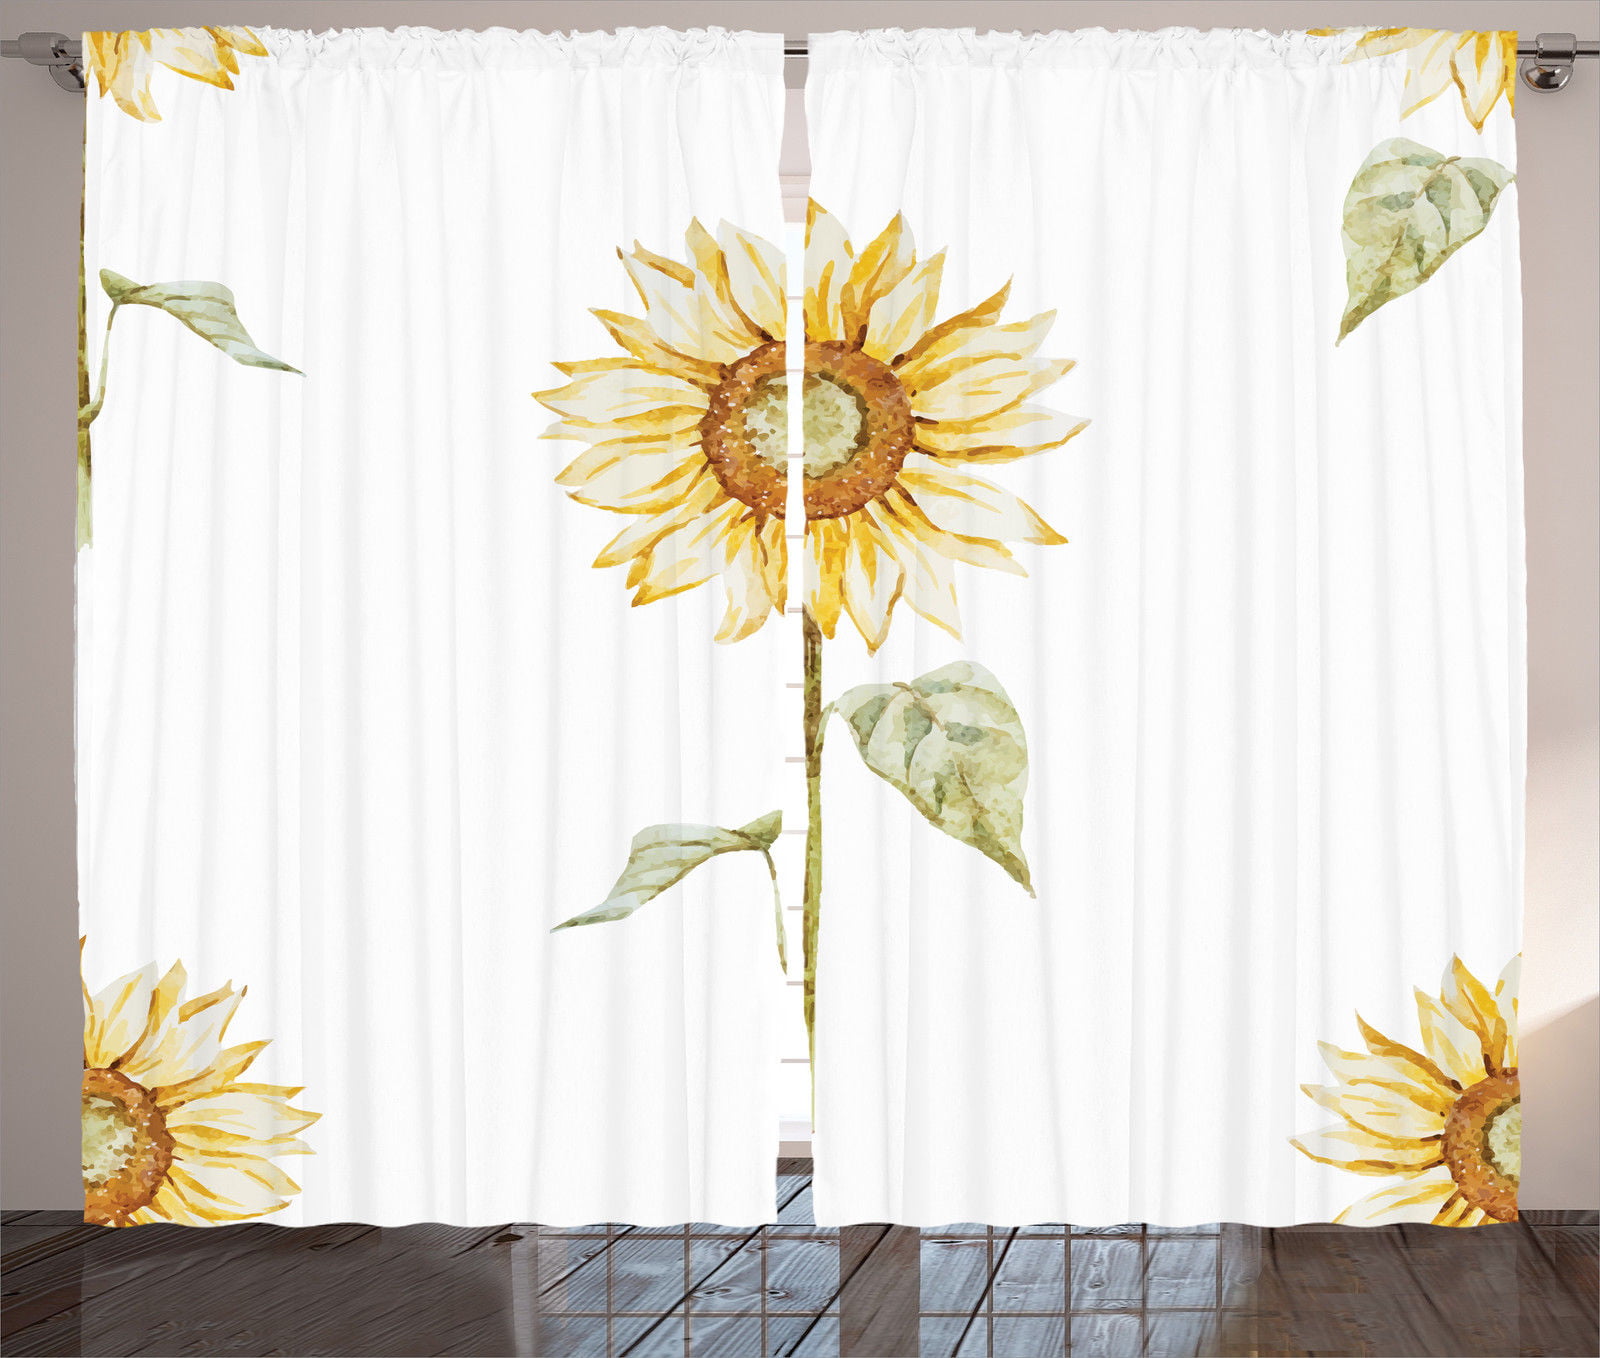 Sunflower Decor Curtains 2 Panels Set Sunflowers In Watercolor Painting Effect Minimalistic Design Decorative Artwork Living Room Bedroom Accessories By Ambesonne Walmart Com Walmart Com